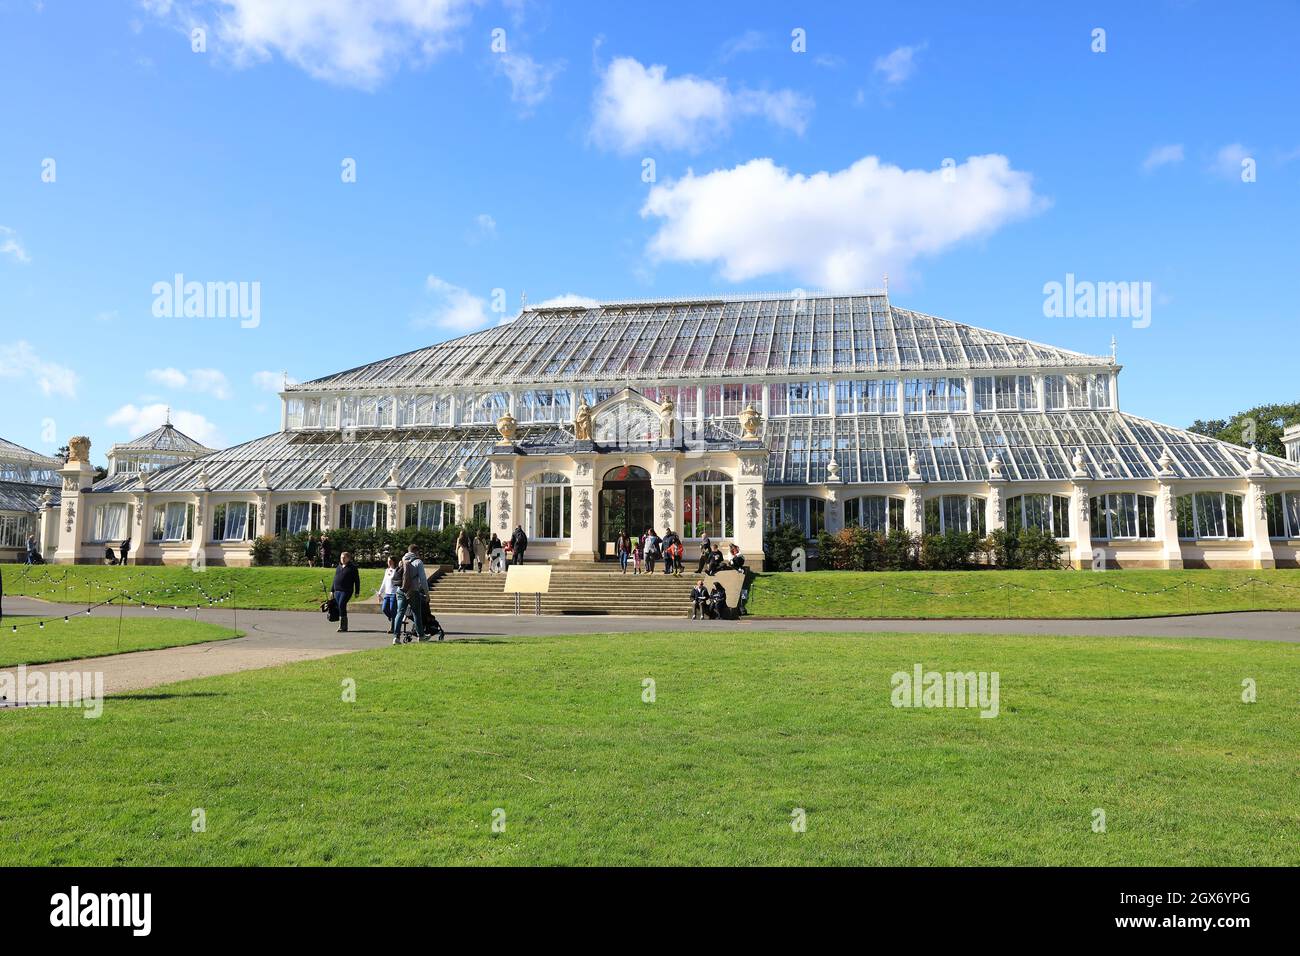 The stunning Temperate House, in autumn sunshine, at Kew Gardens, SW London, UK Stock Photo